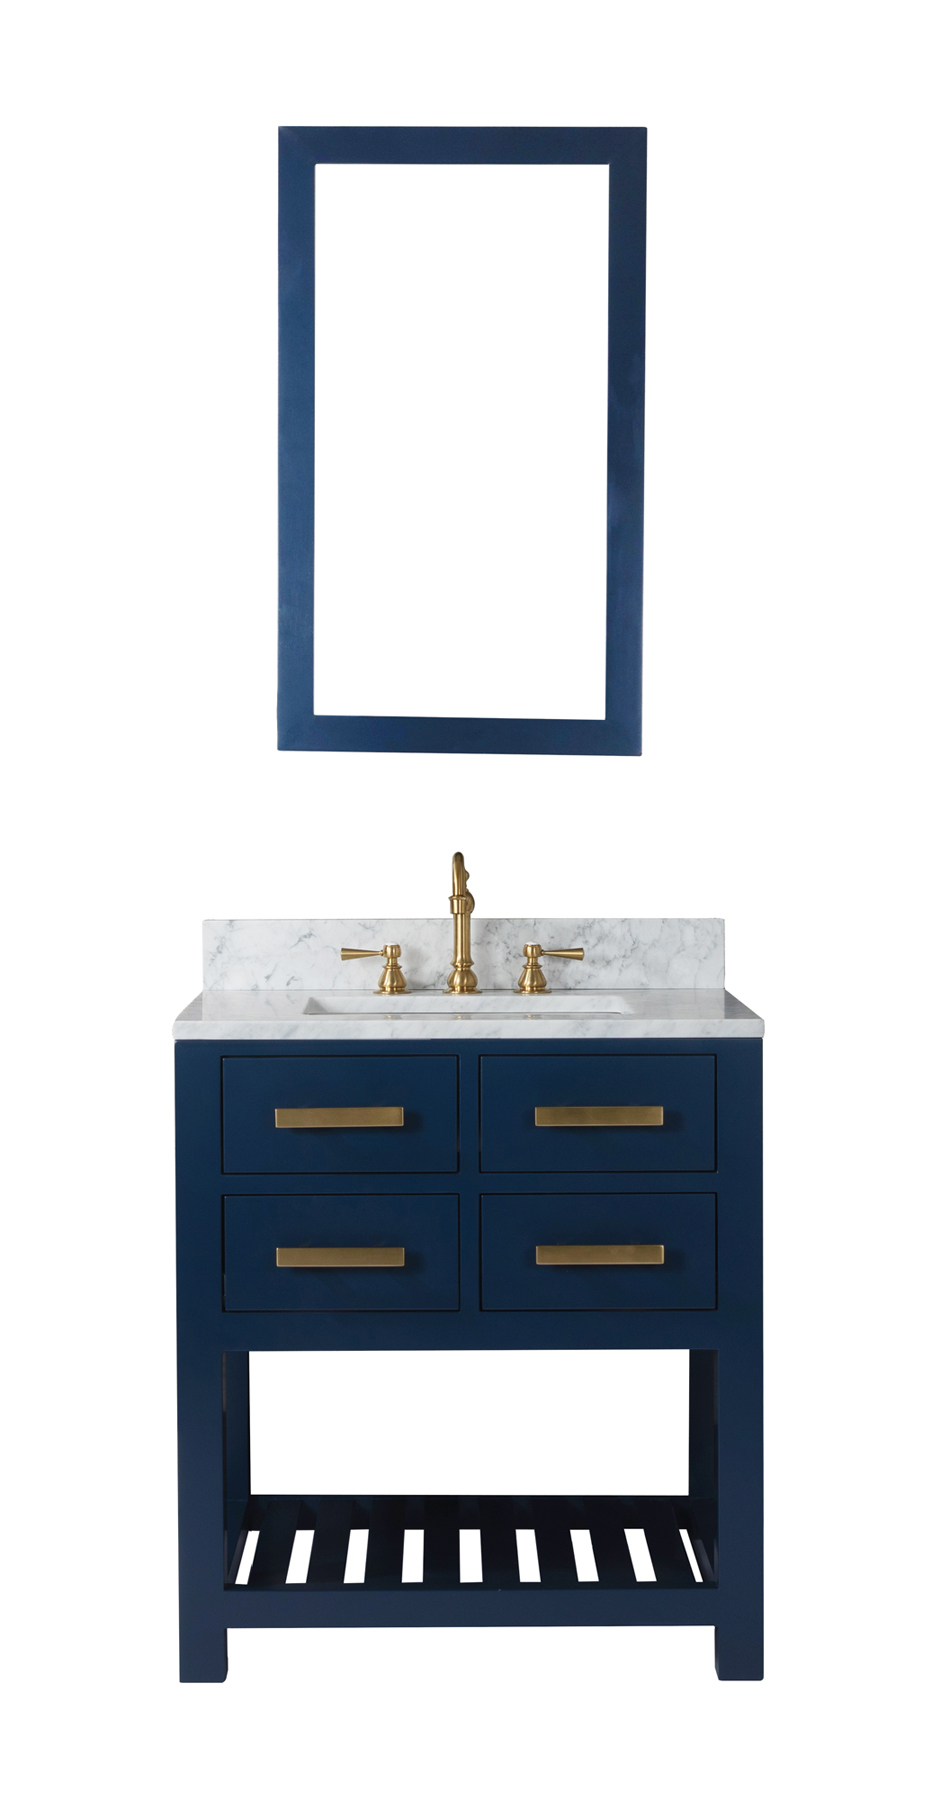 30 Inch Monarch Blue Single Sink Bathroom Vanity From The Madalyn Collection